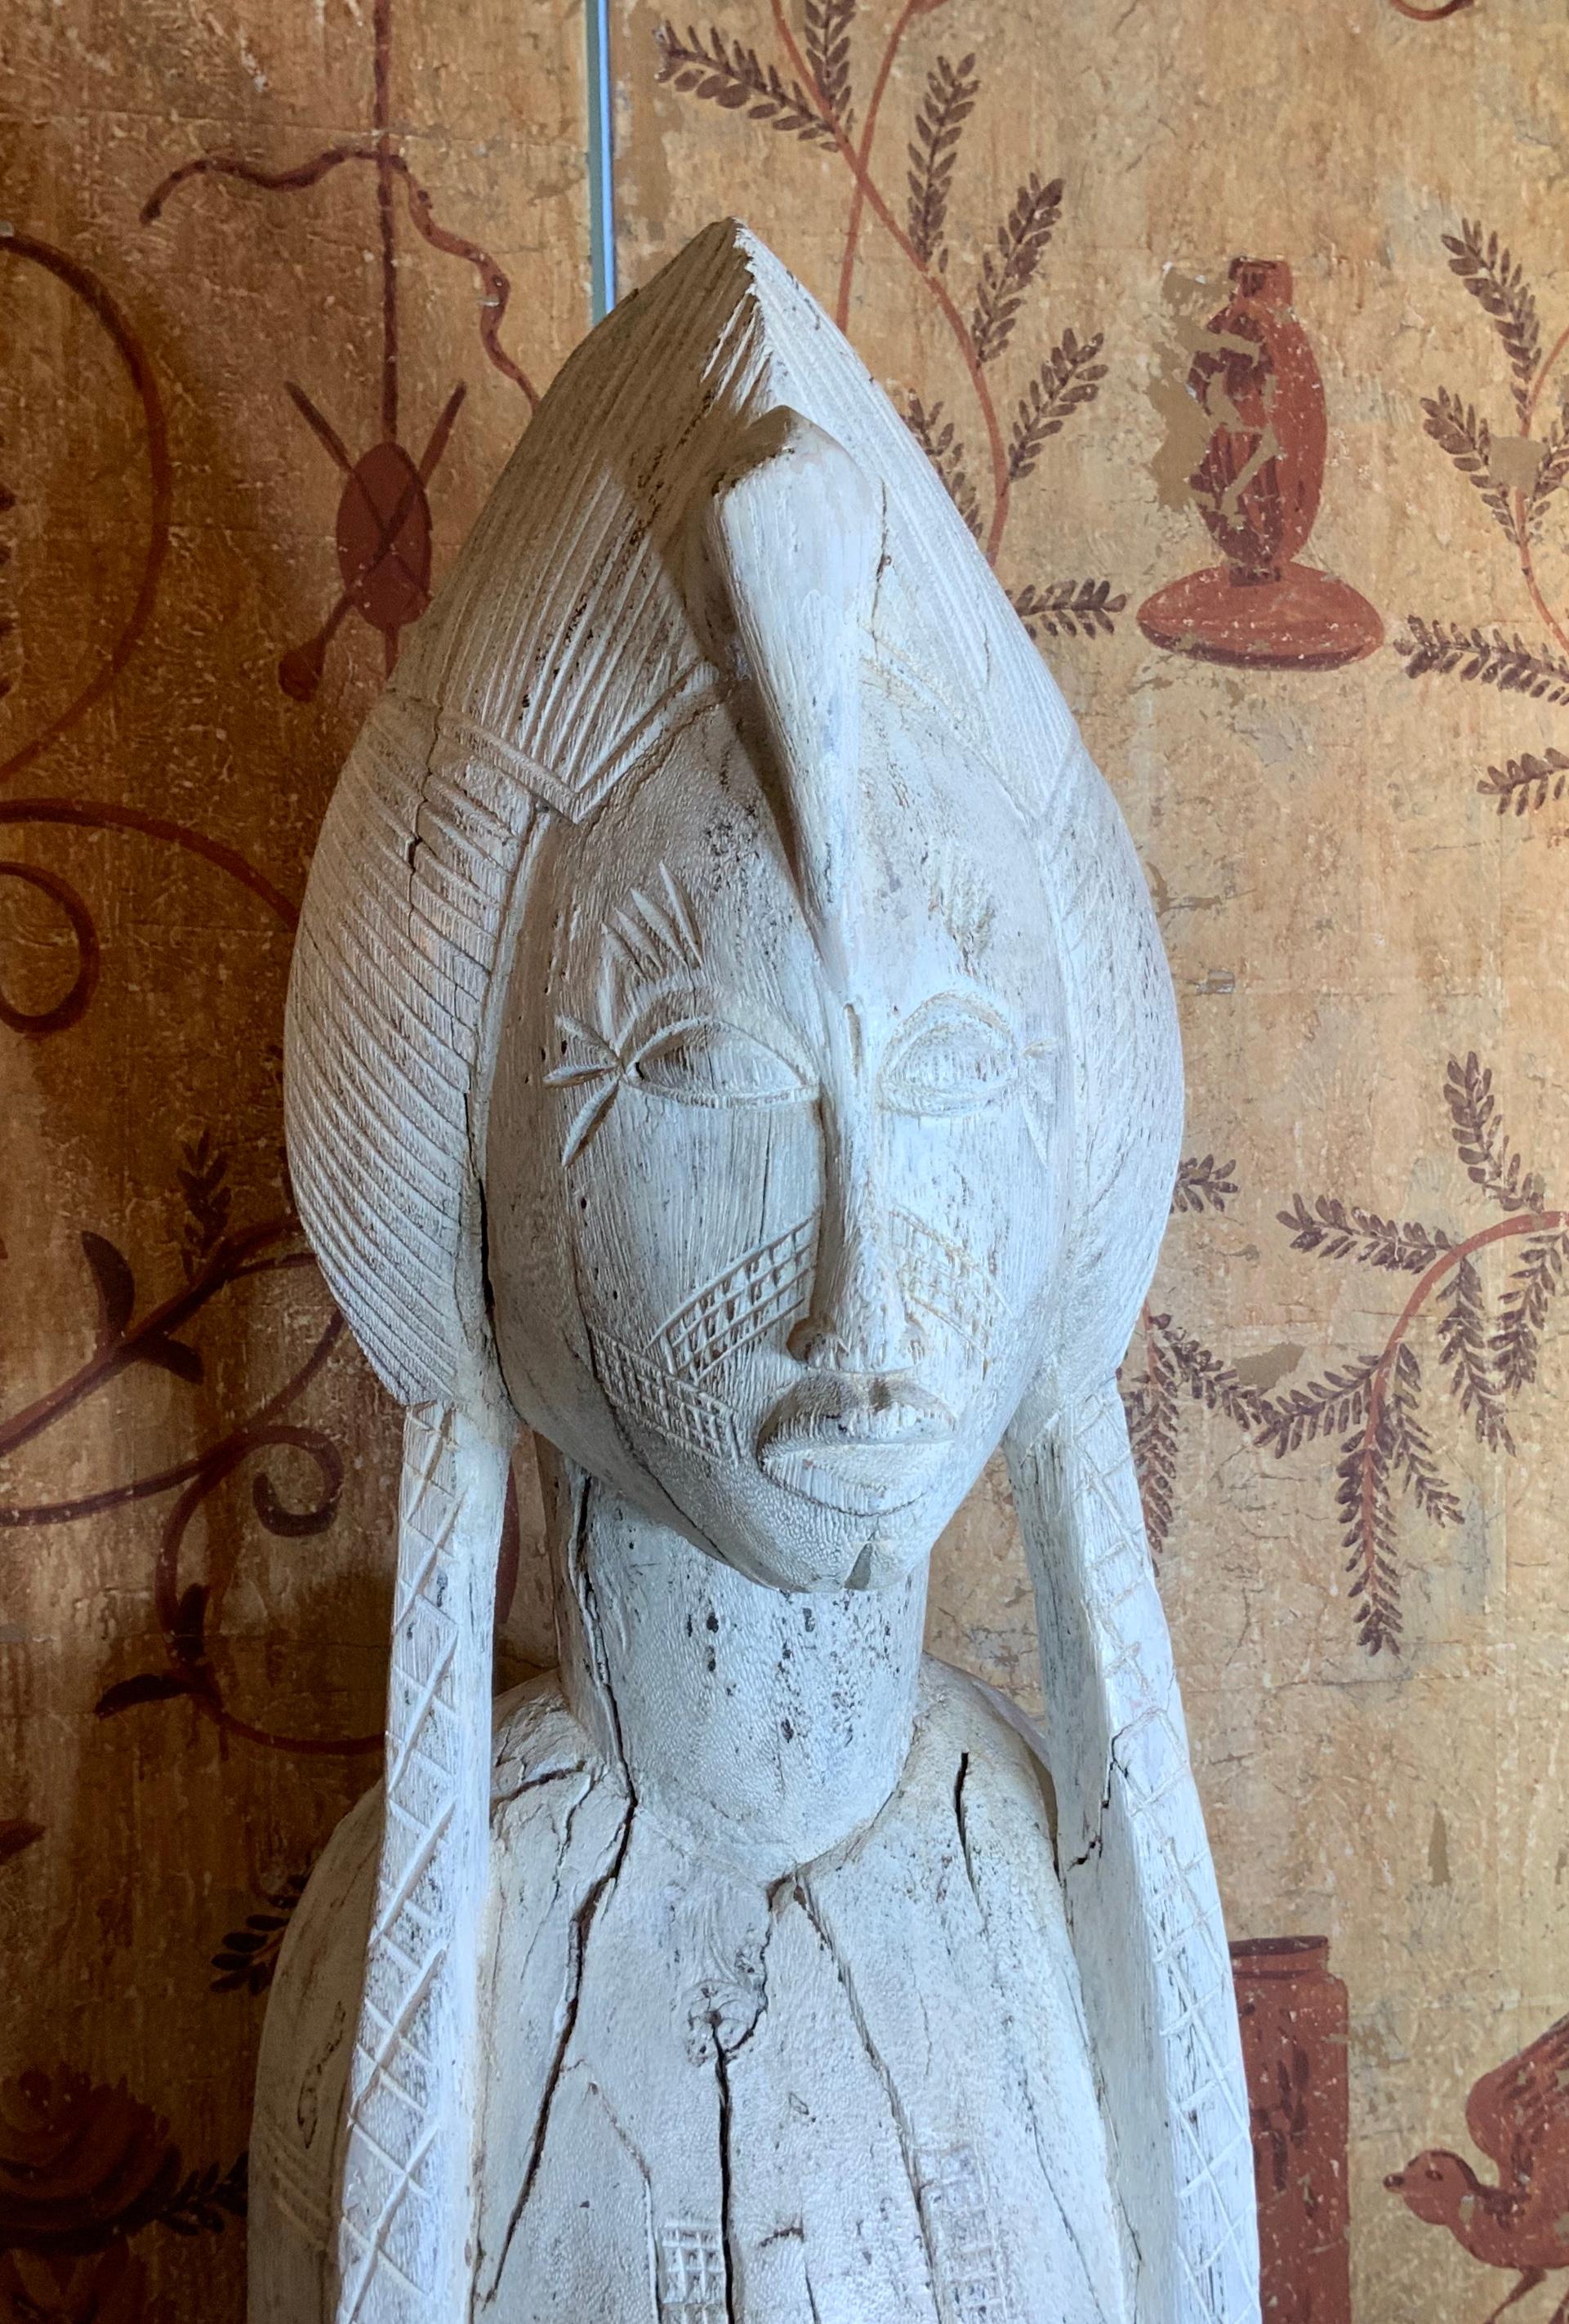 Exceptional hand wood carving of a woman probably African queen, beautiful face showing grace and resolute looking forward, white color finish and clear wax restoration. Professionally mounted on solid wood base. Would make powerful object of art